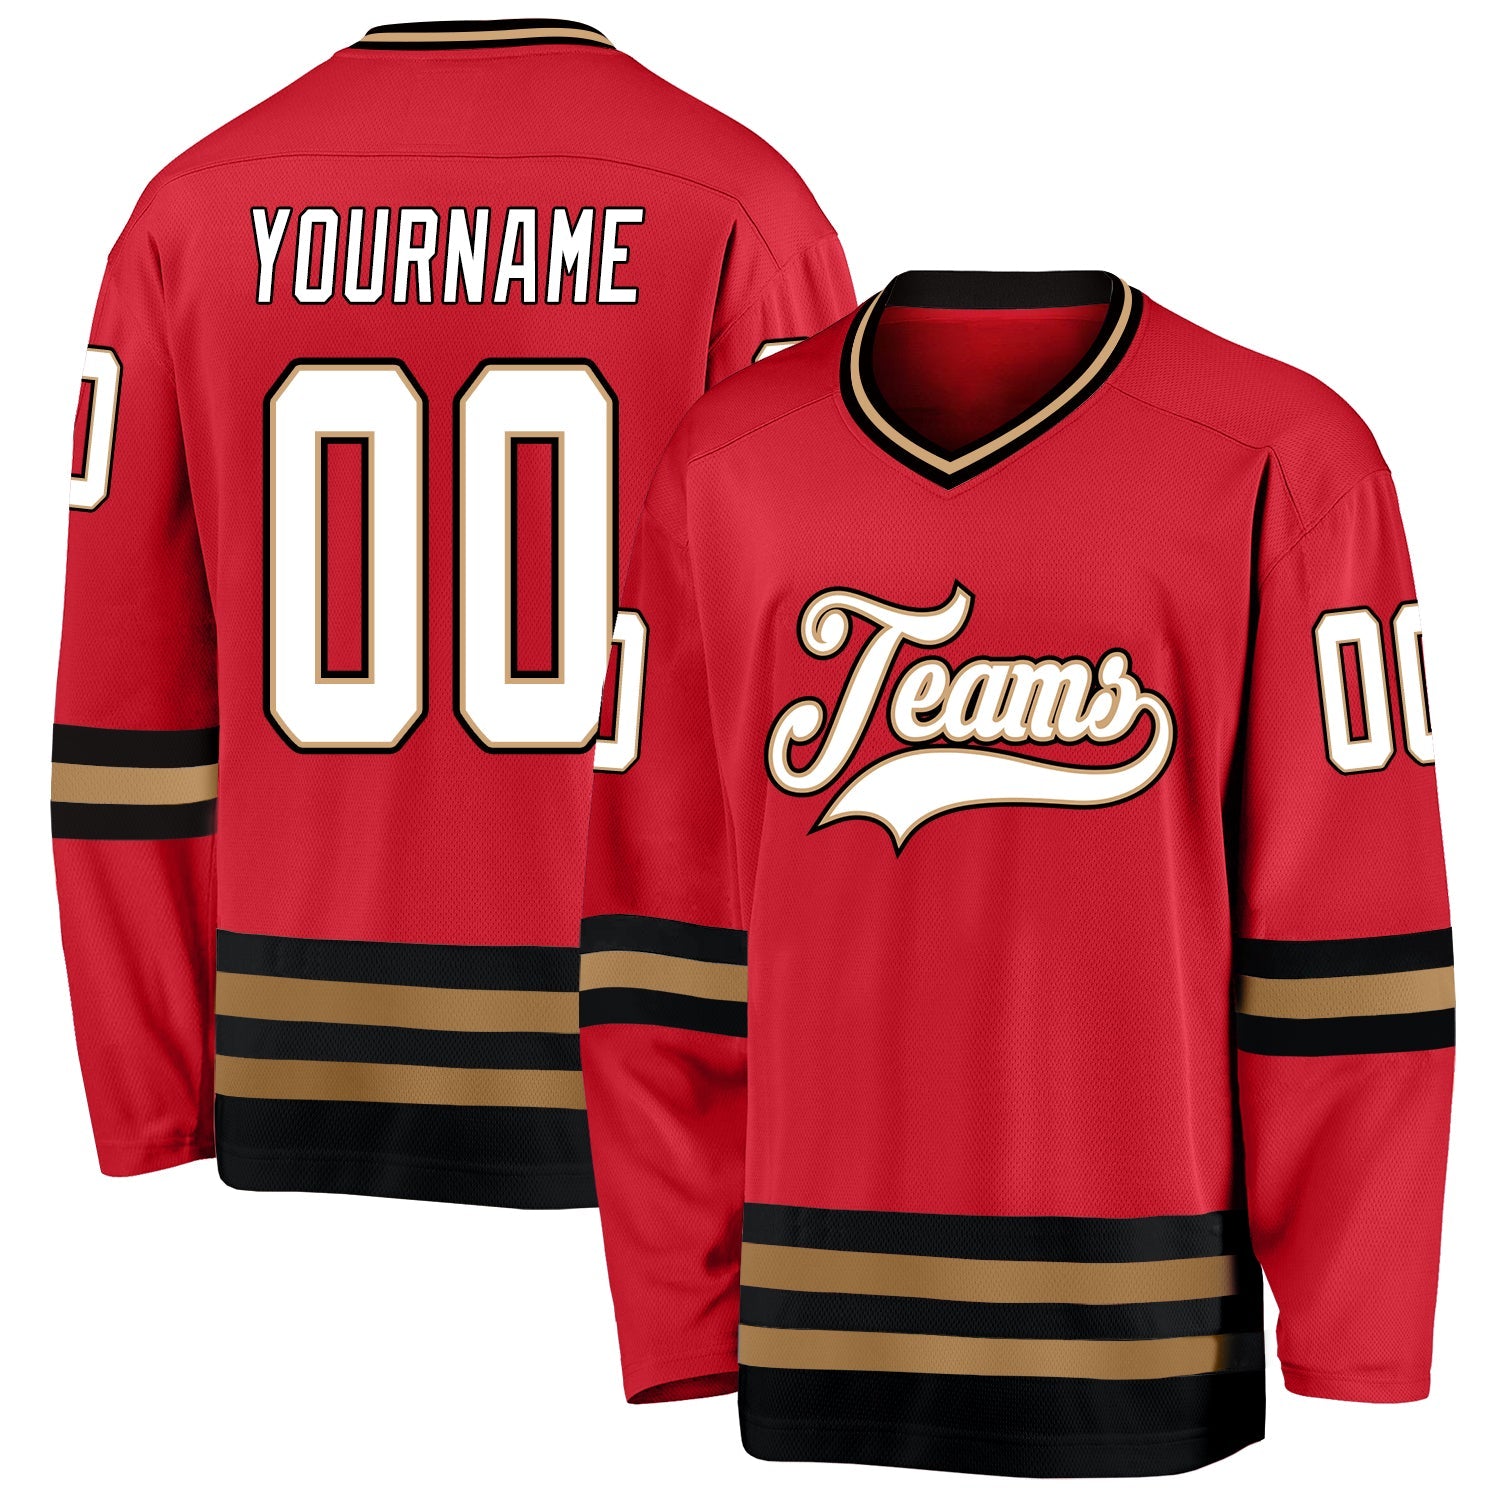 Custom Red White-Old Gold Hockey Jersey